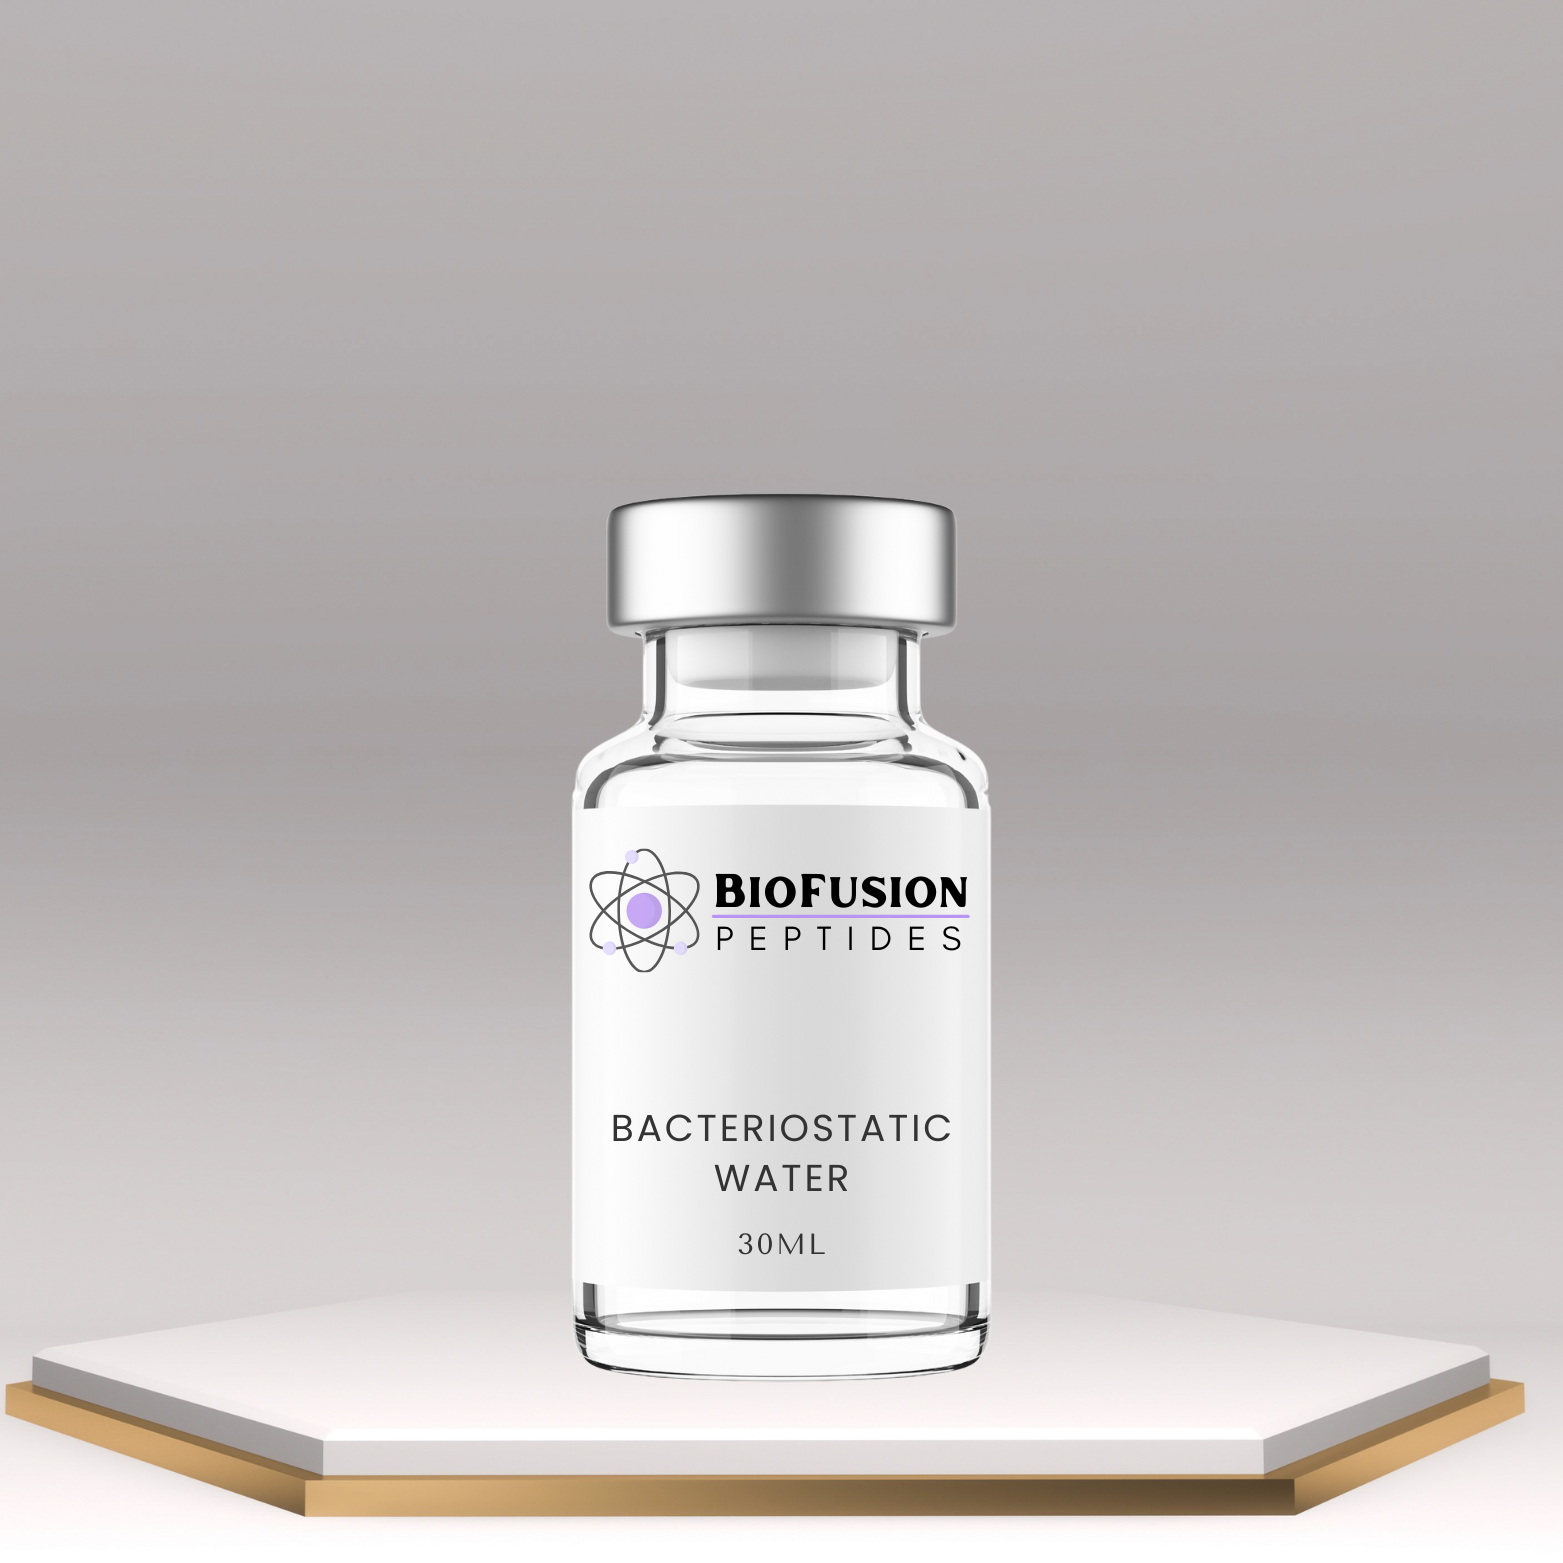 BioFusion Peptides Bacteriostatic Water 30ML vial